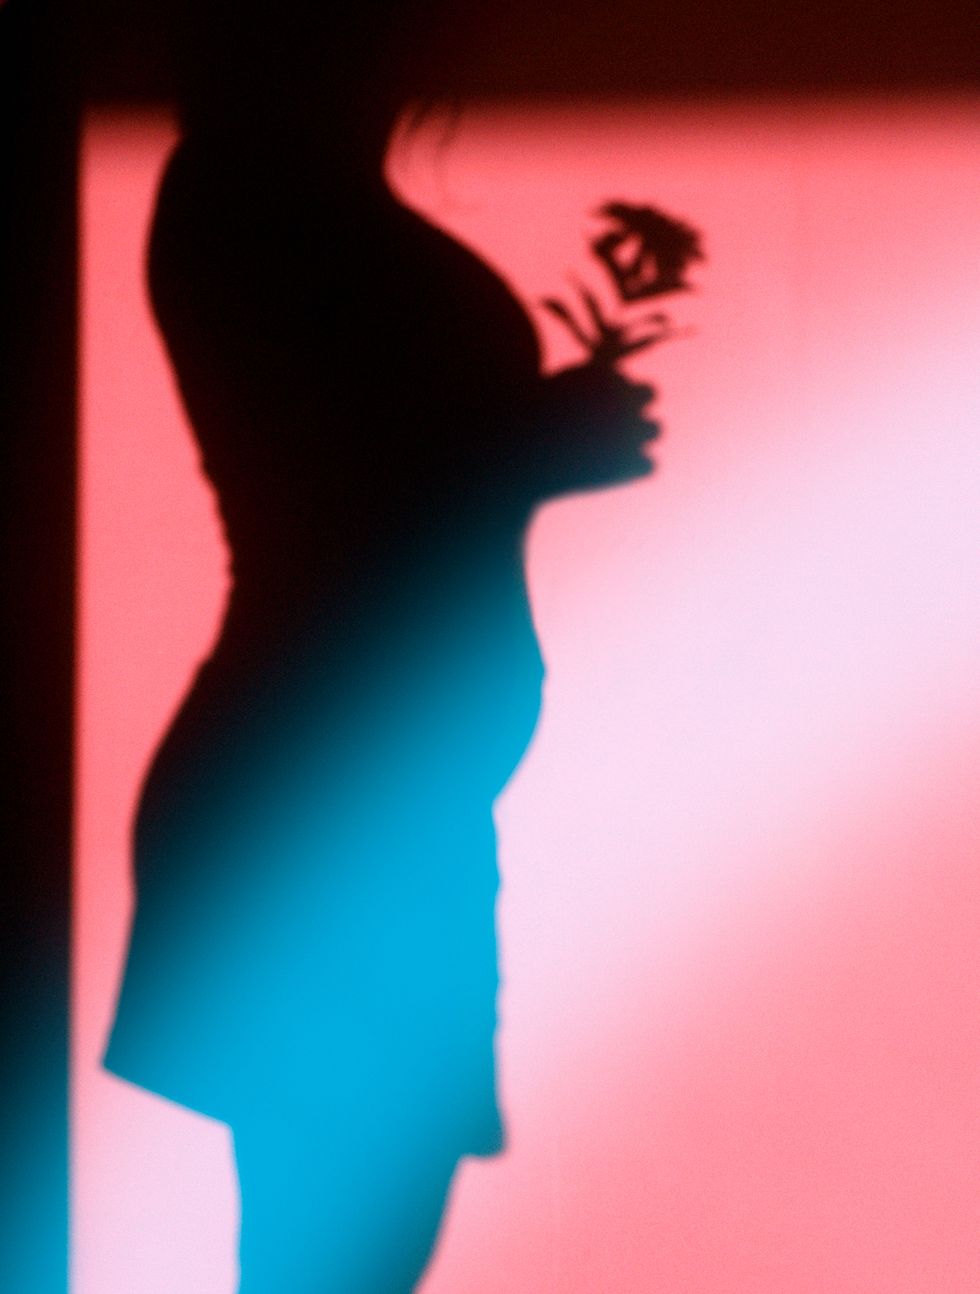 shadow of a pregnant woman holding a flower